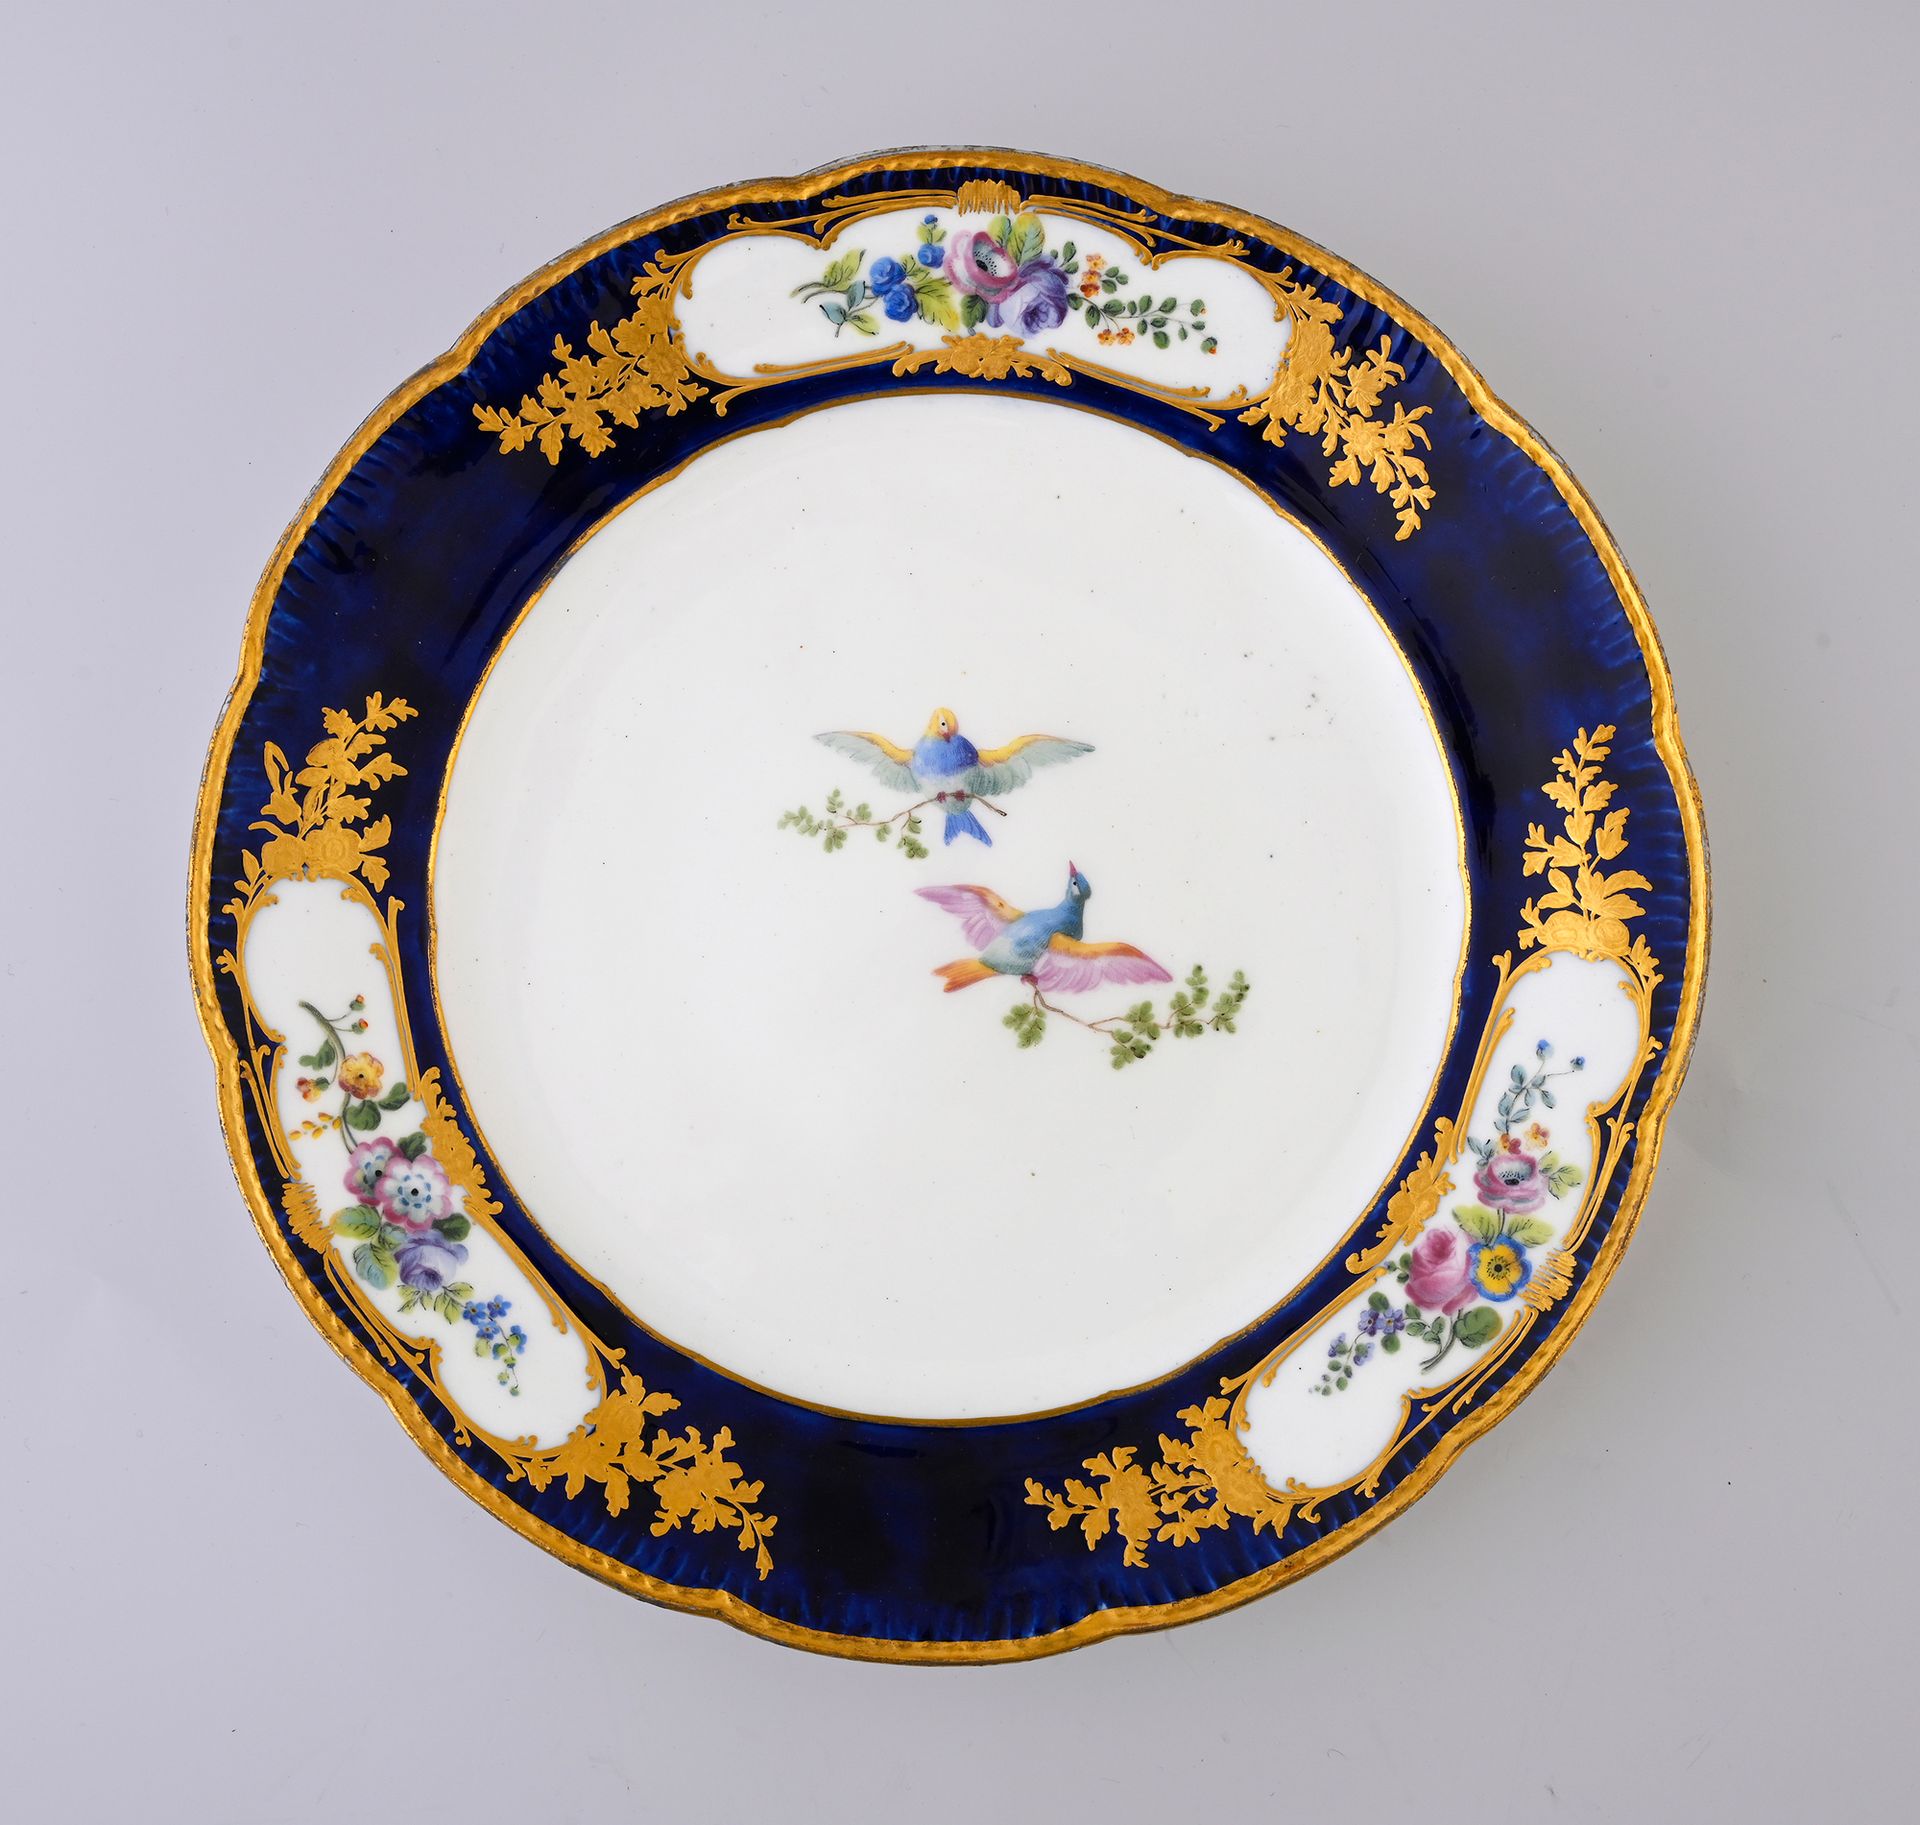 Null Plate "with ornaments" in Sevres porcelain of the 18th century
Mark in blue&hellip;